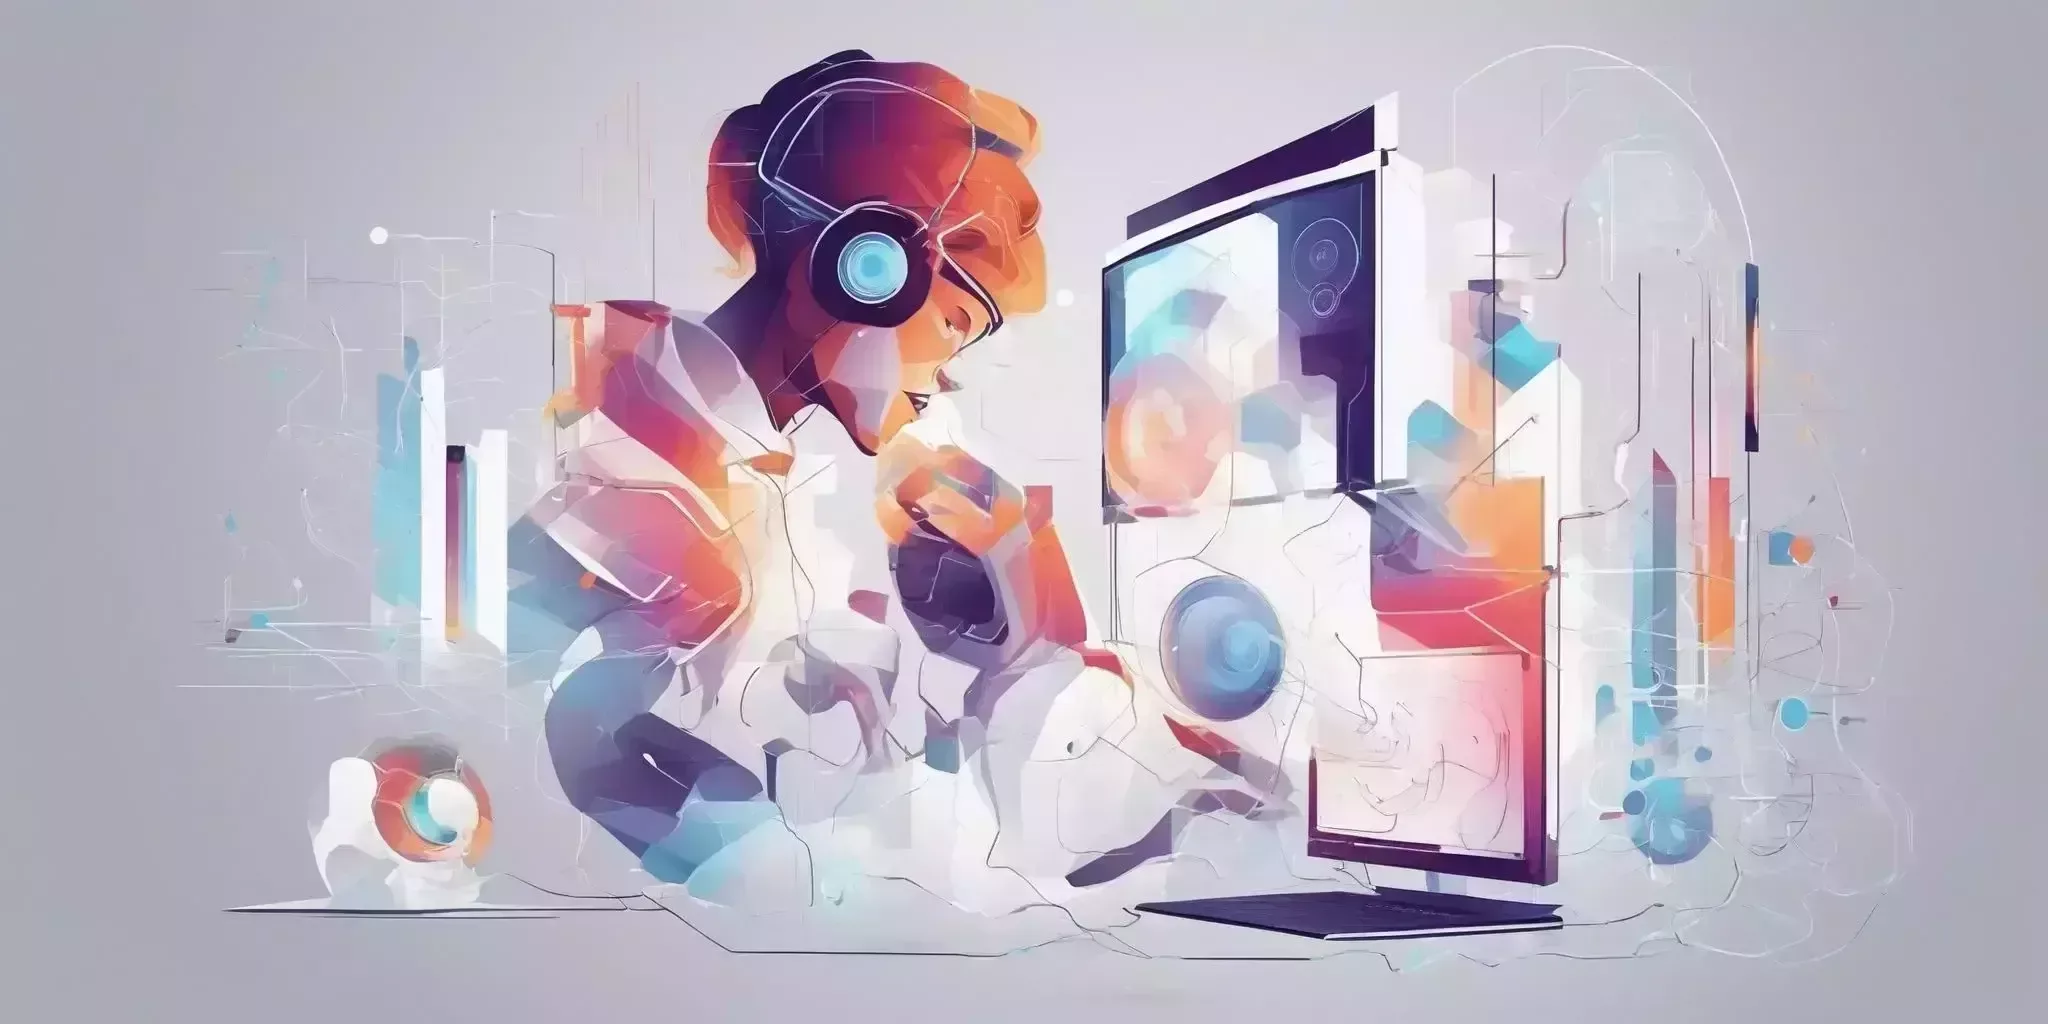 technology in illustration style with gradients and white background